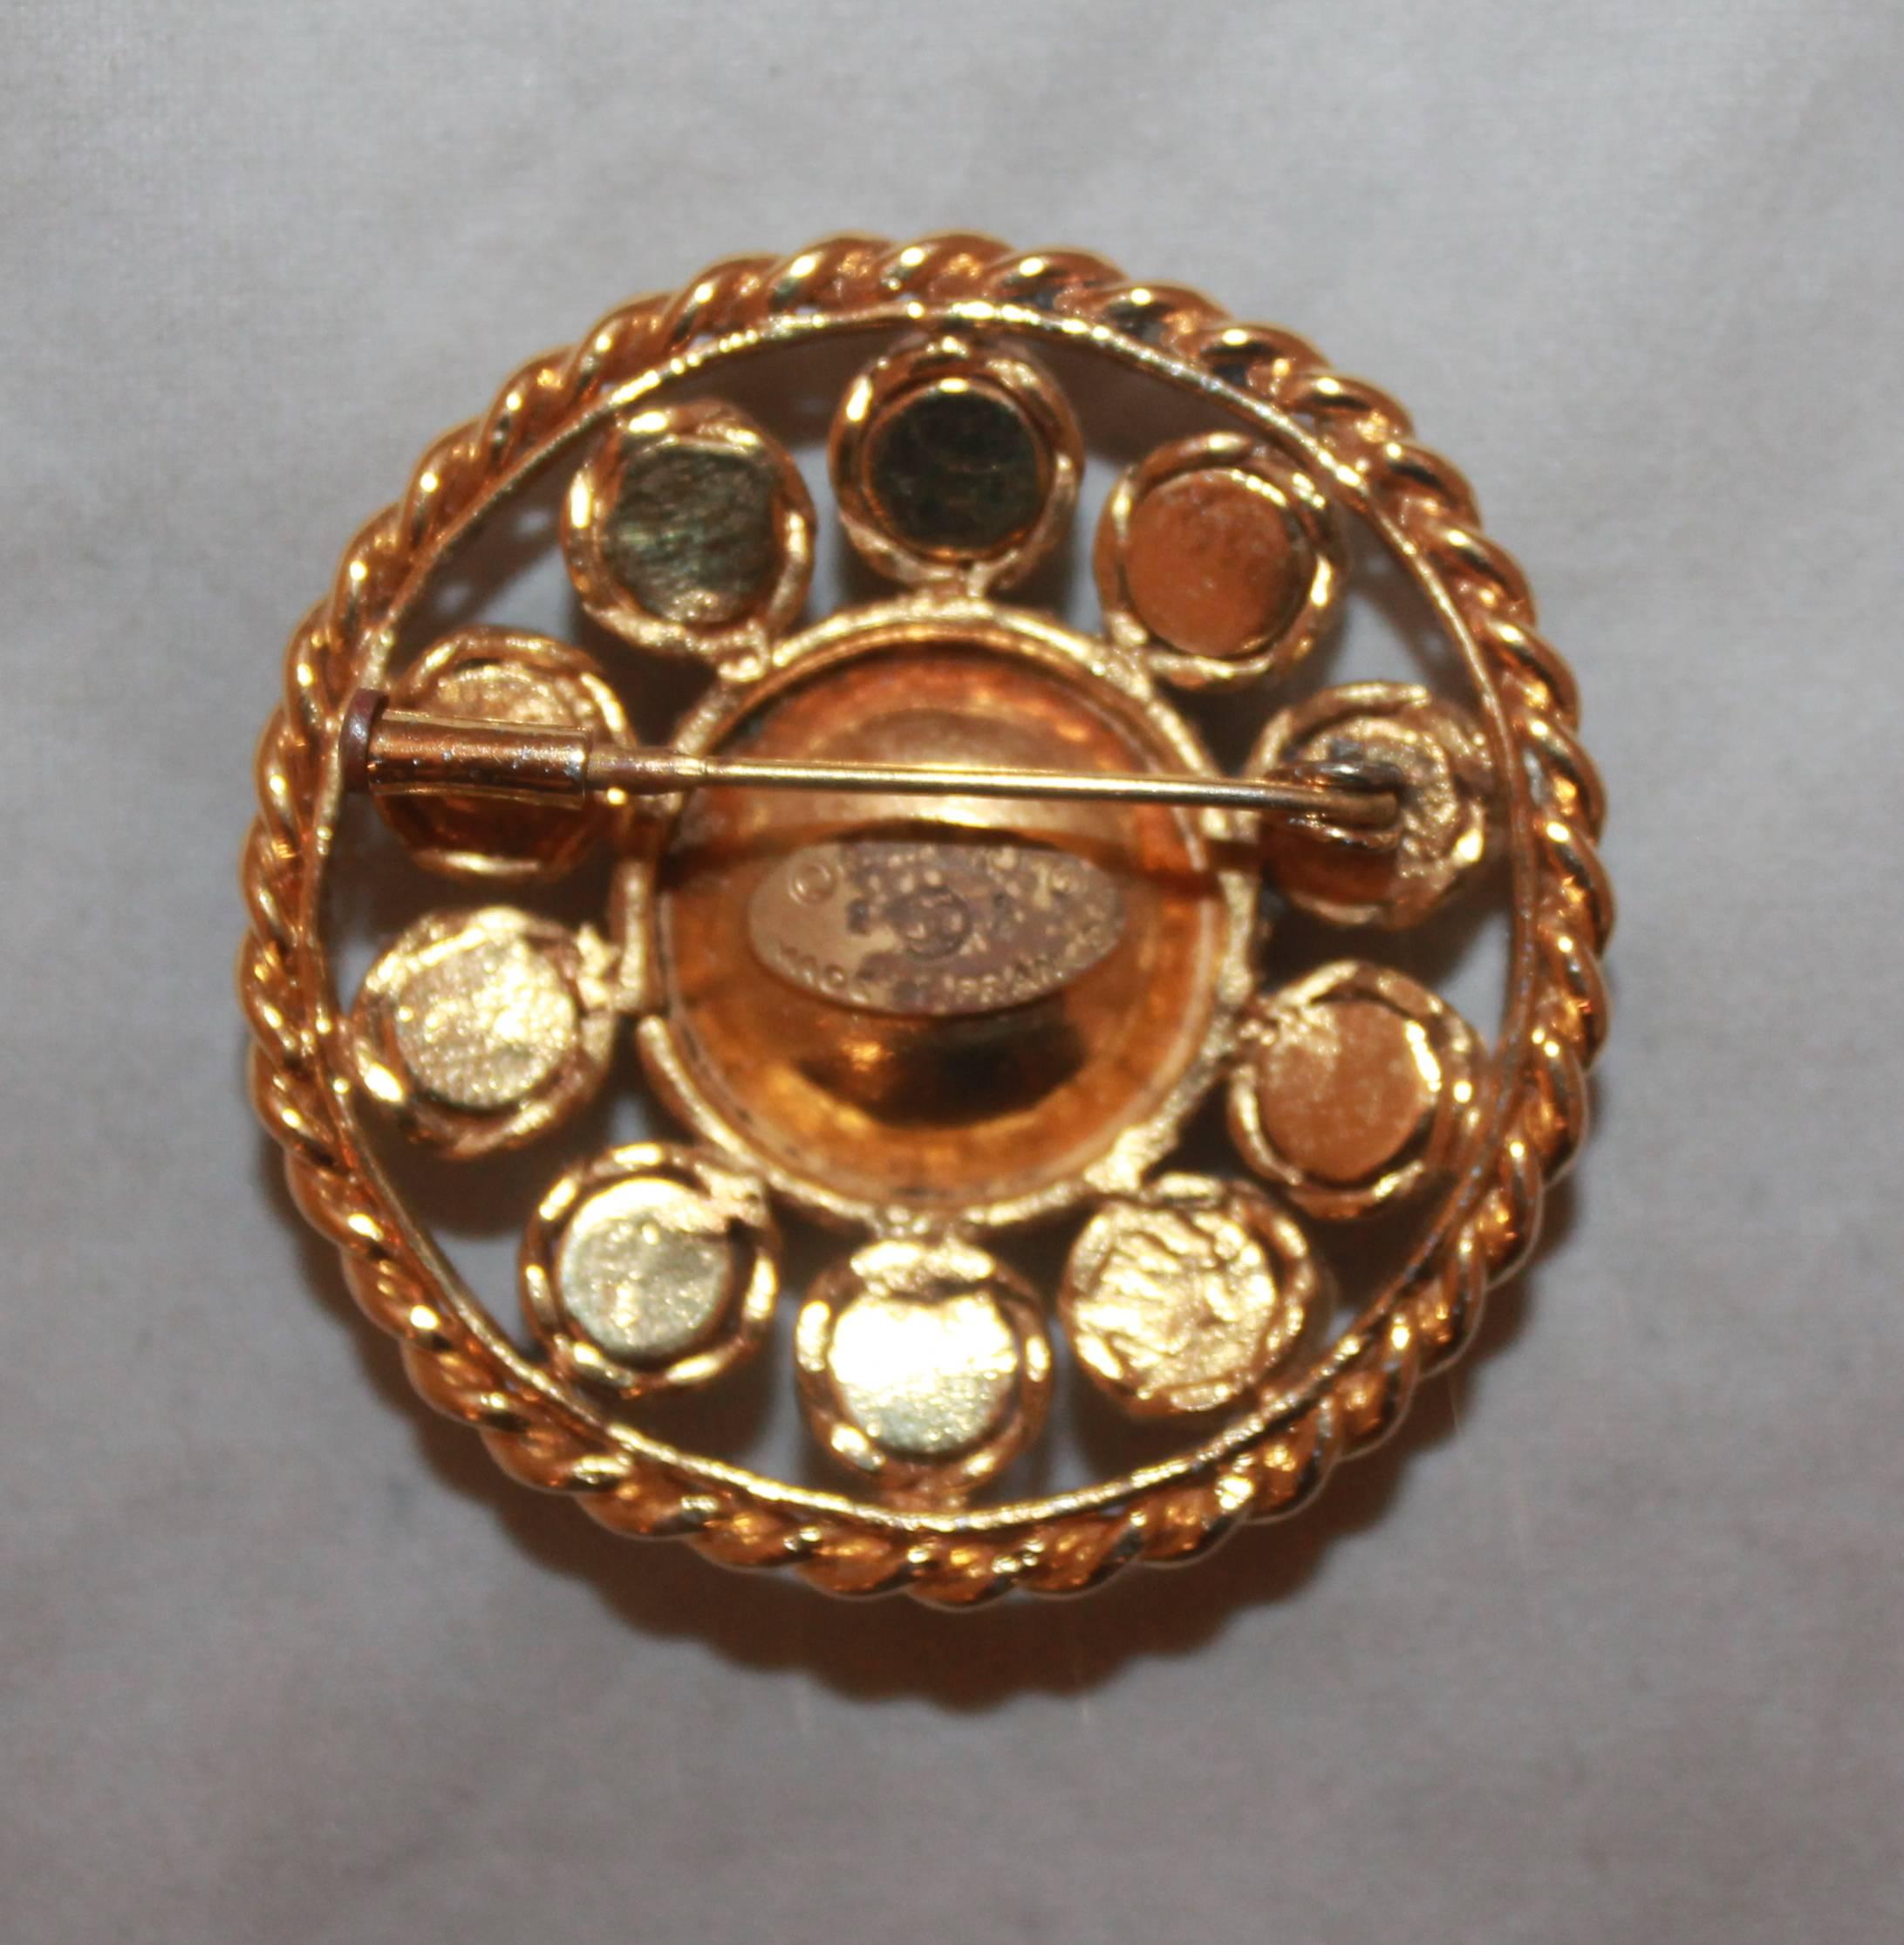 Chanel 1986 Vintage Goldtone Brooch with Blue Gripoix & Rhinestones. This round brooch is in excellent vintage condition and has a braided look on the edge with a cluster of rhinestones and a larger blue gripoix stone in the middle. 

Length &